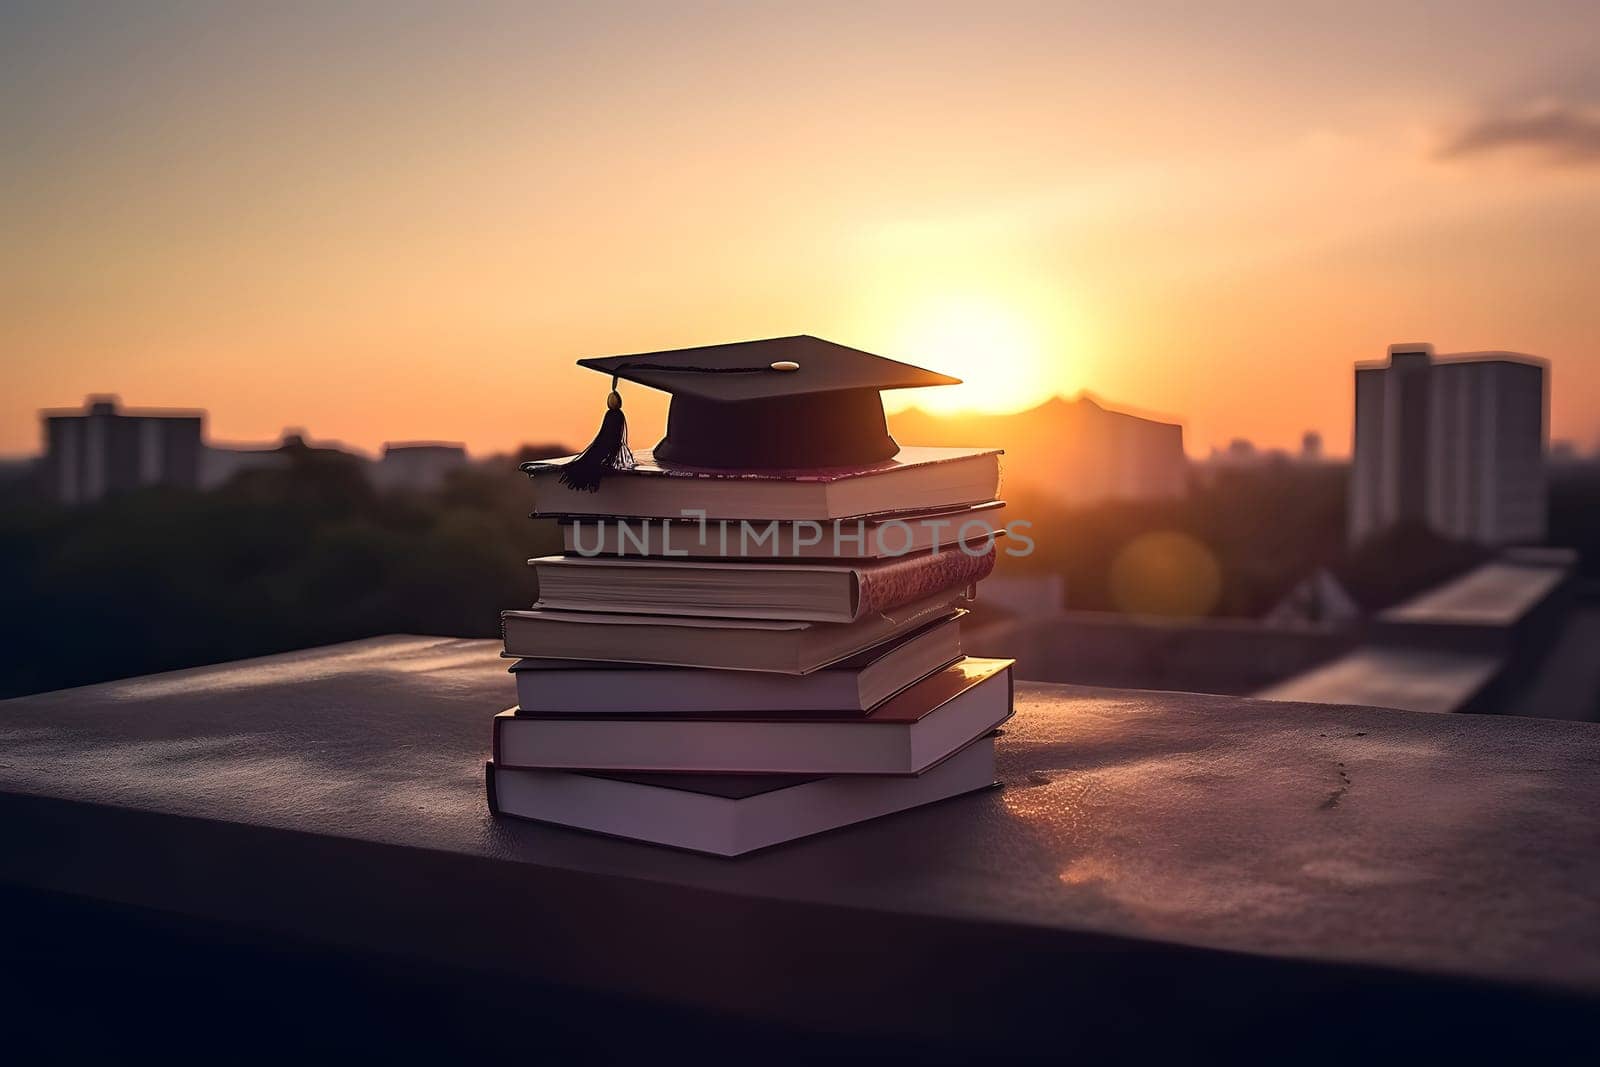 a stack of books and graduation cap on the roof with the sunset in the background, neural network generated image by z1b